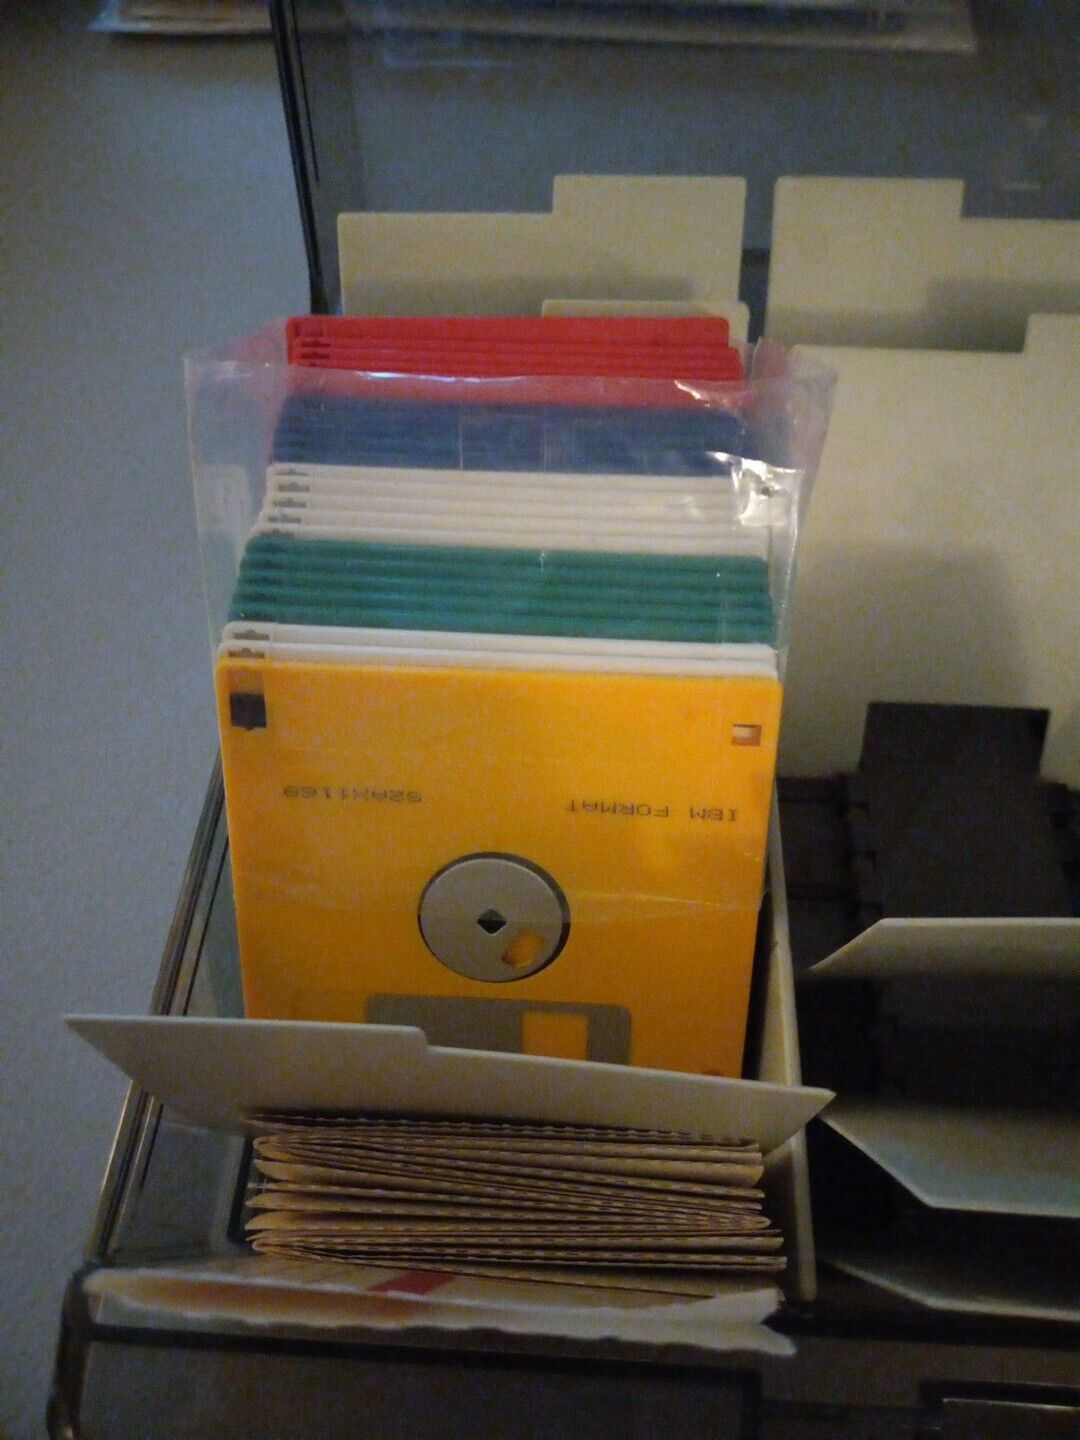 24 New Sony Disks, and labels in plastic box